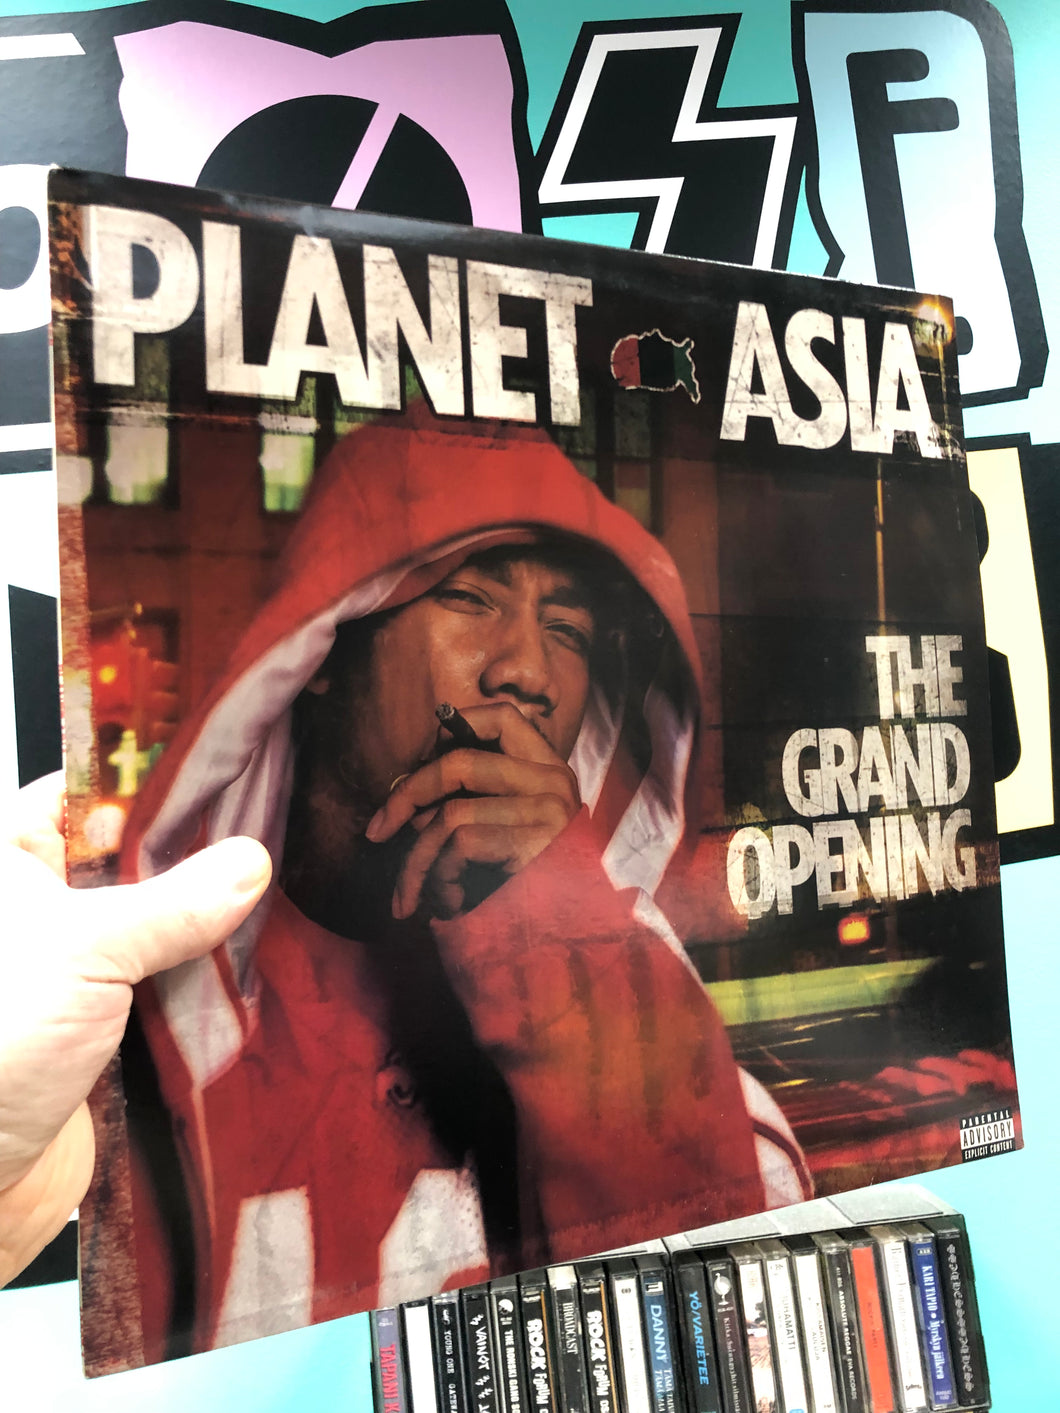 Planet Asia: The Grand Opening, 1st pressing, US 2004